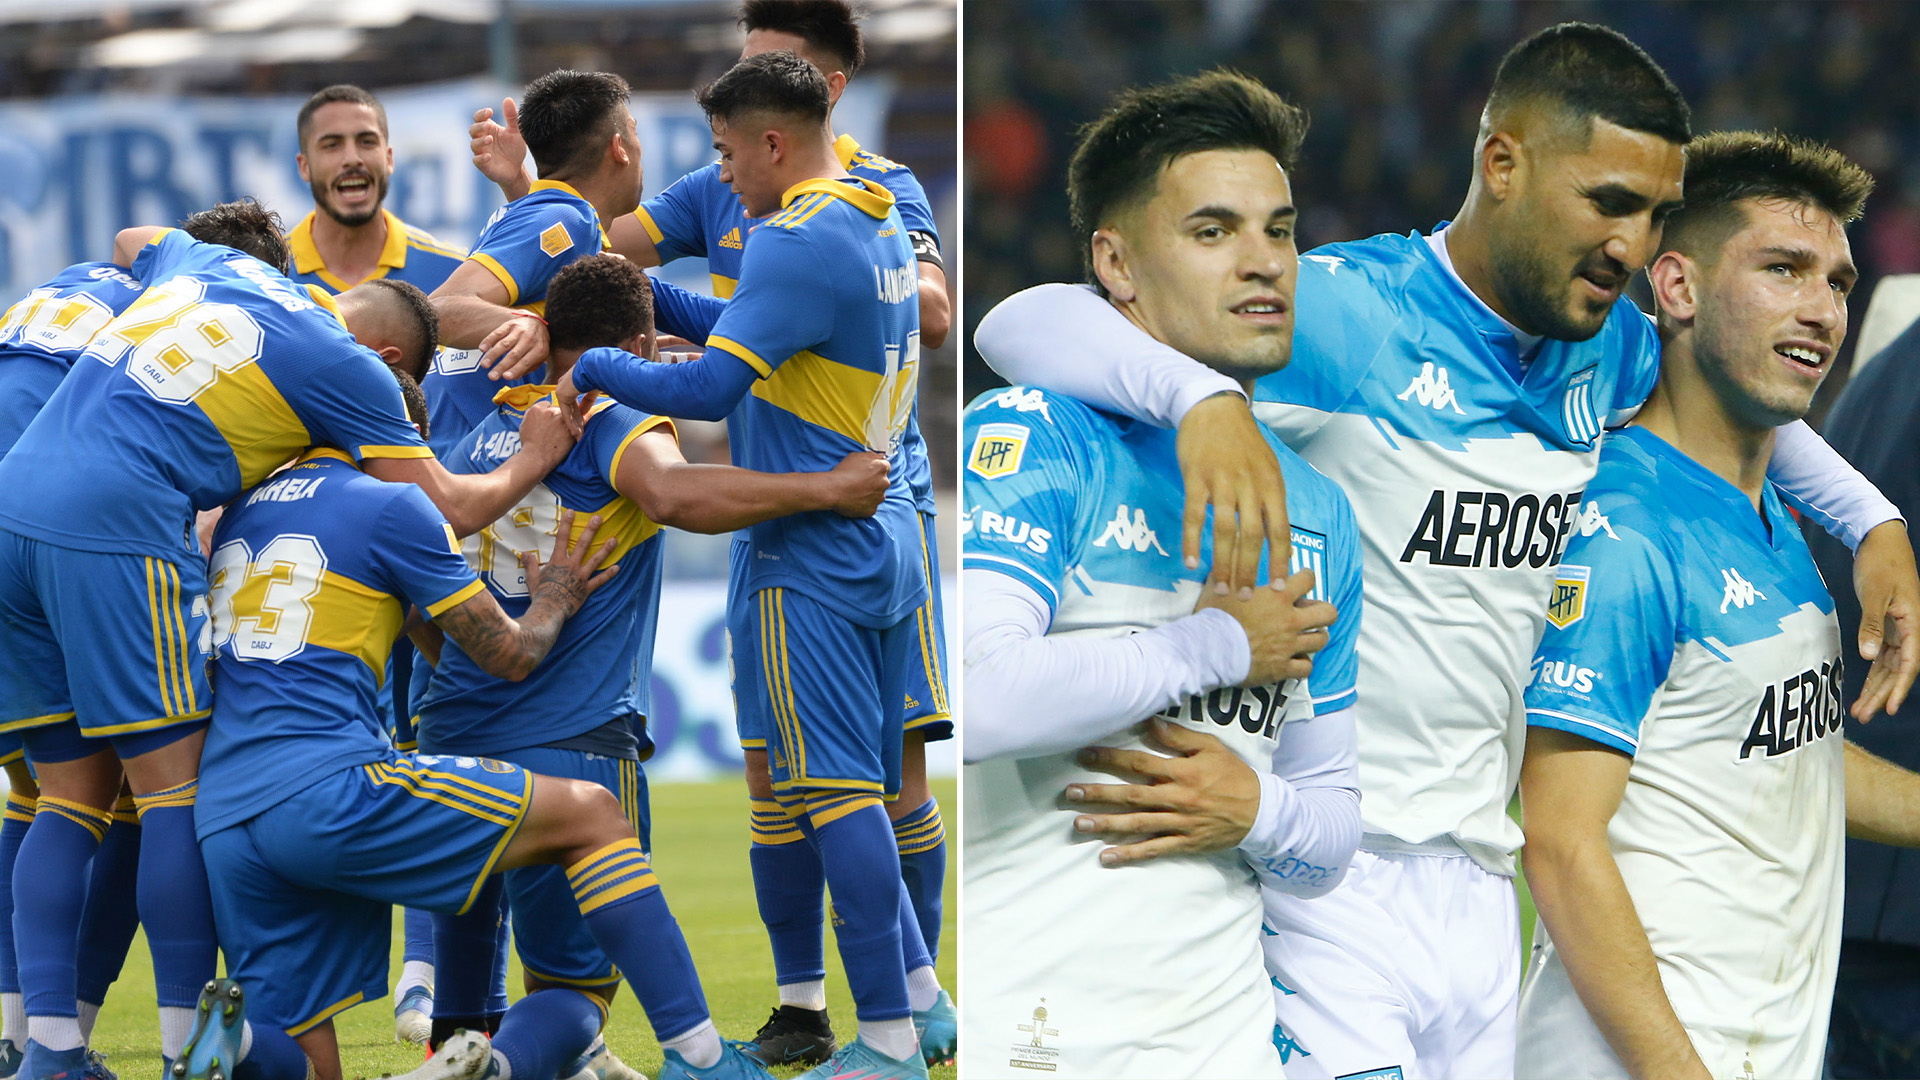 Boca Juniors and Racing meet for the International Super Cup and will look for another star